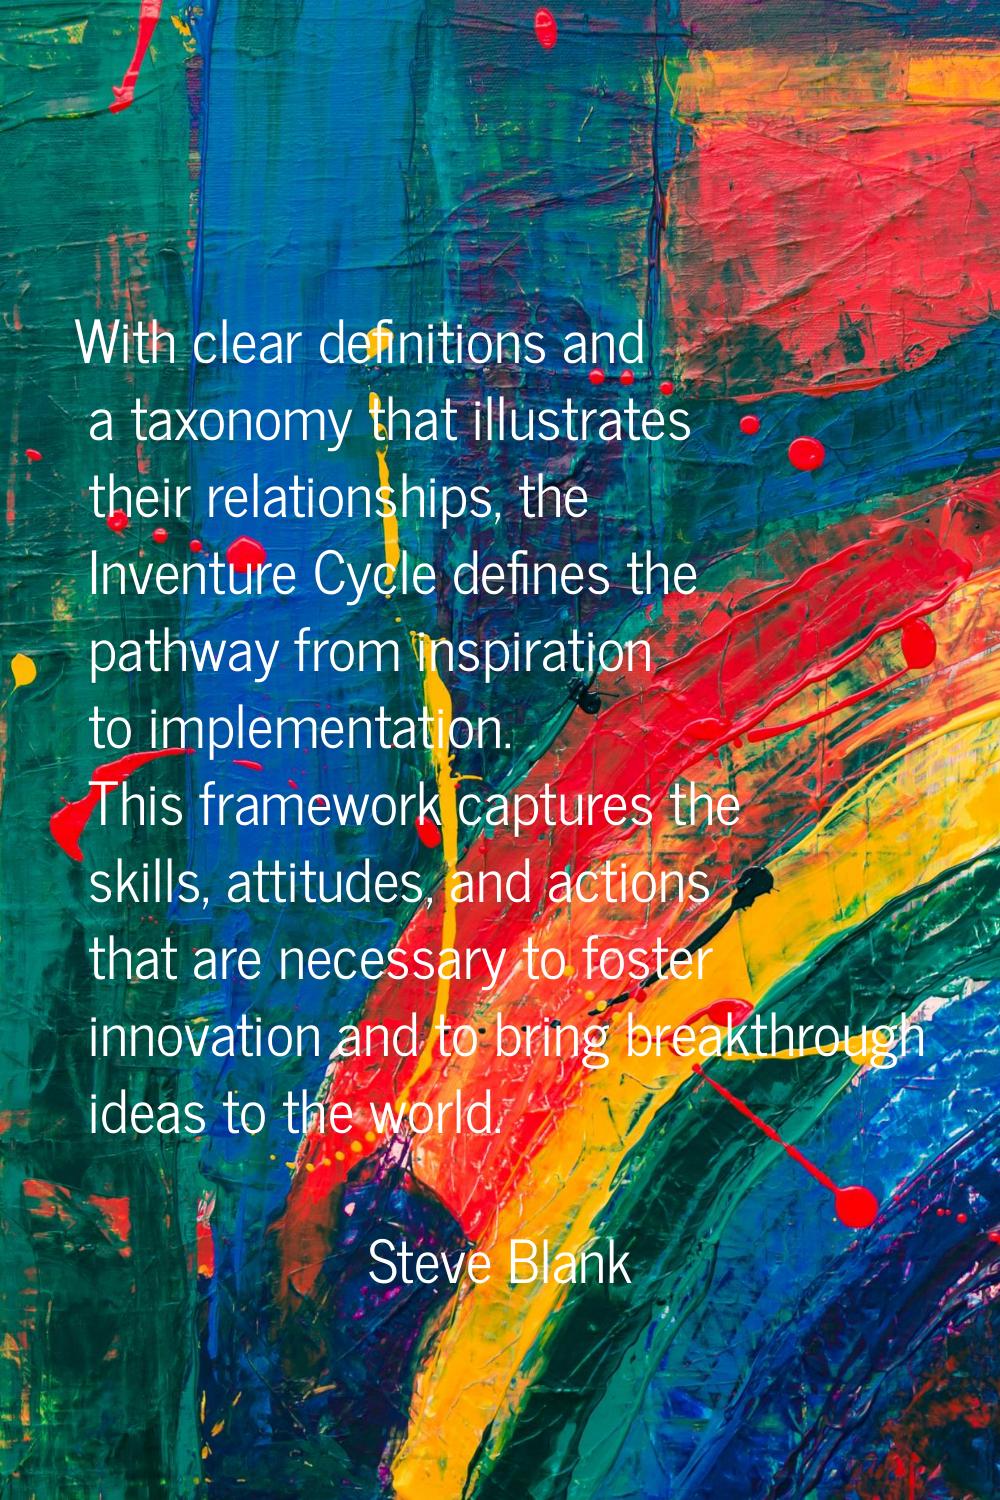 With clear definitions and a taxonomy that illustrates their relationships, the Inventure Cycle def